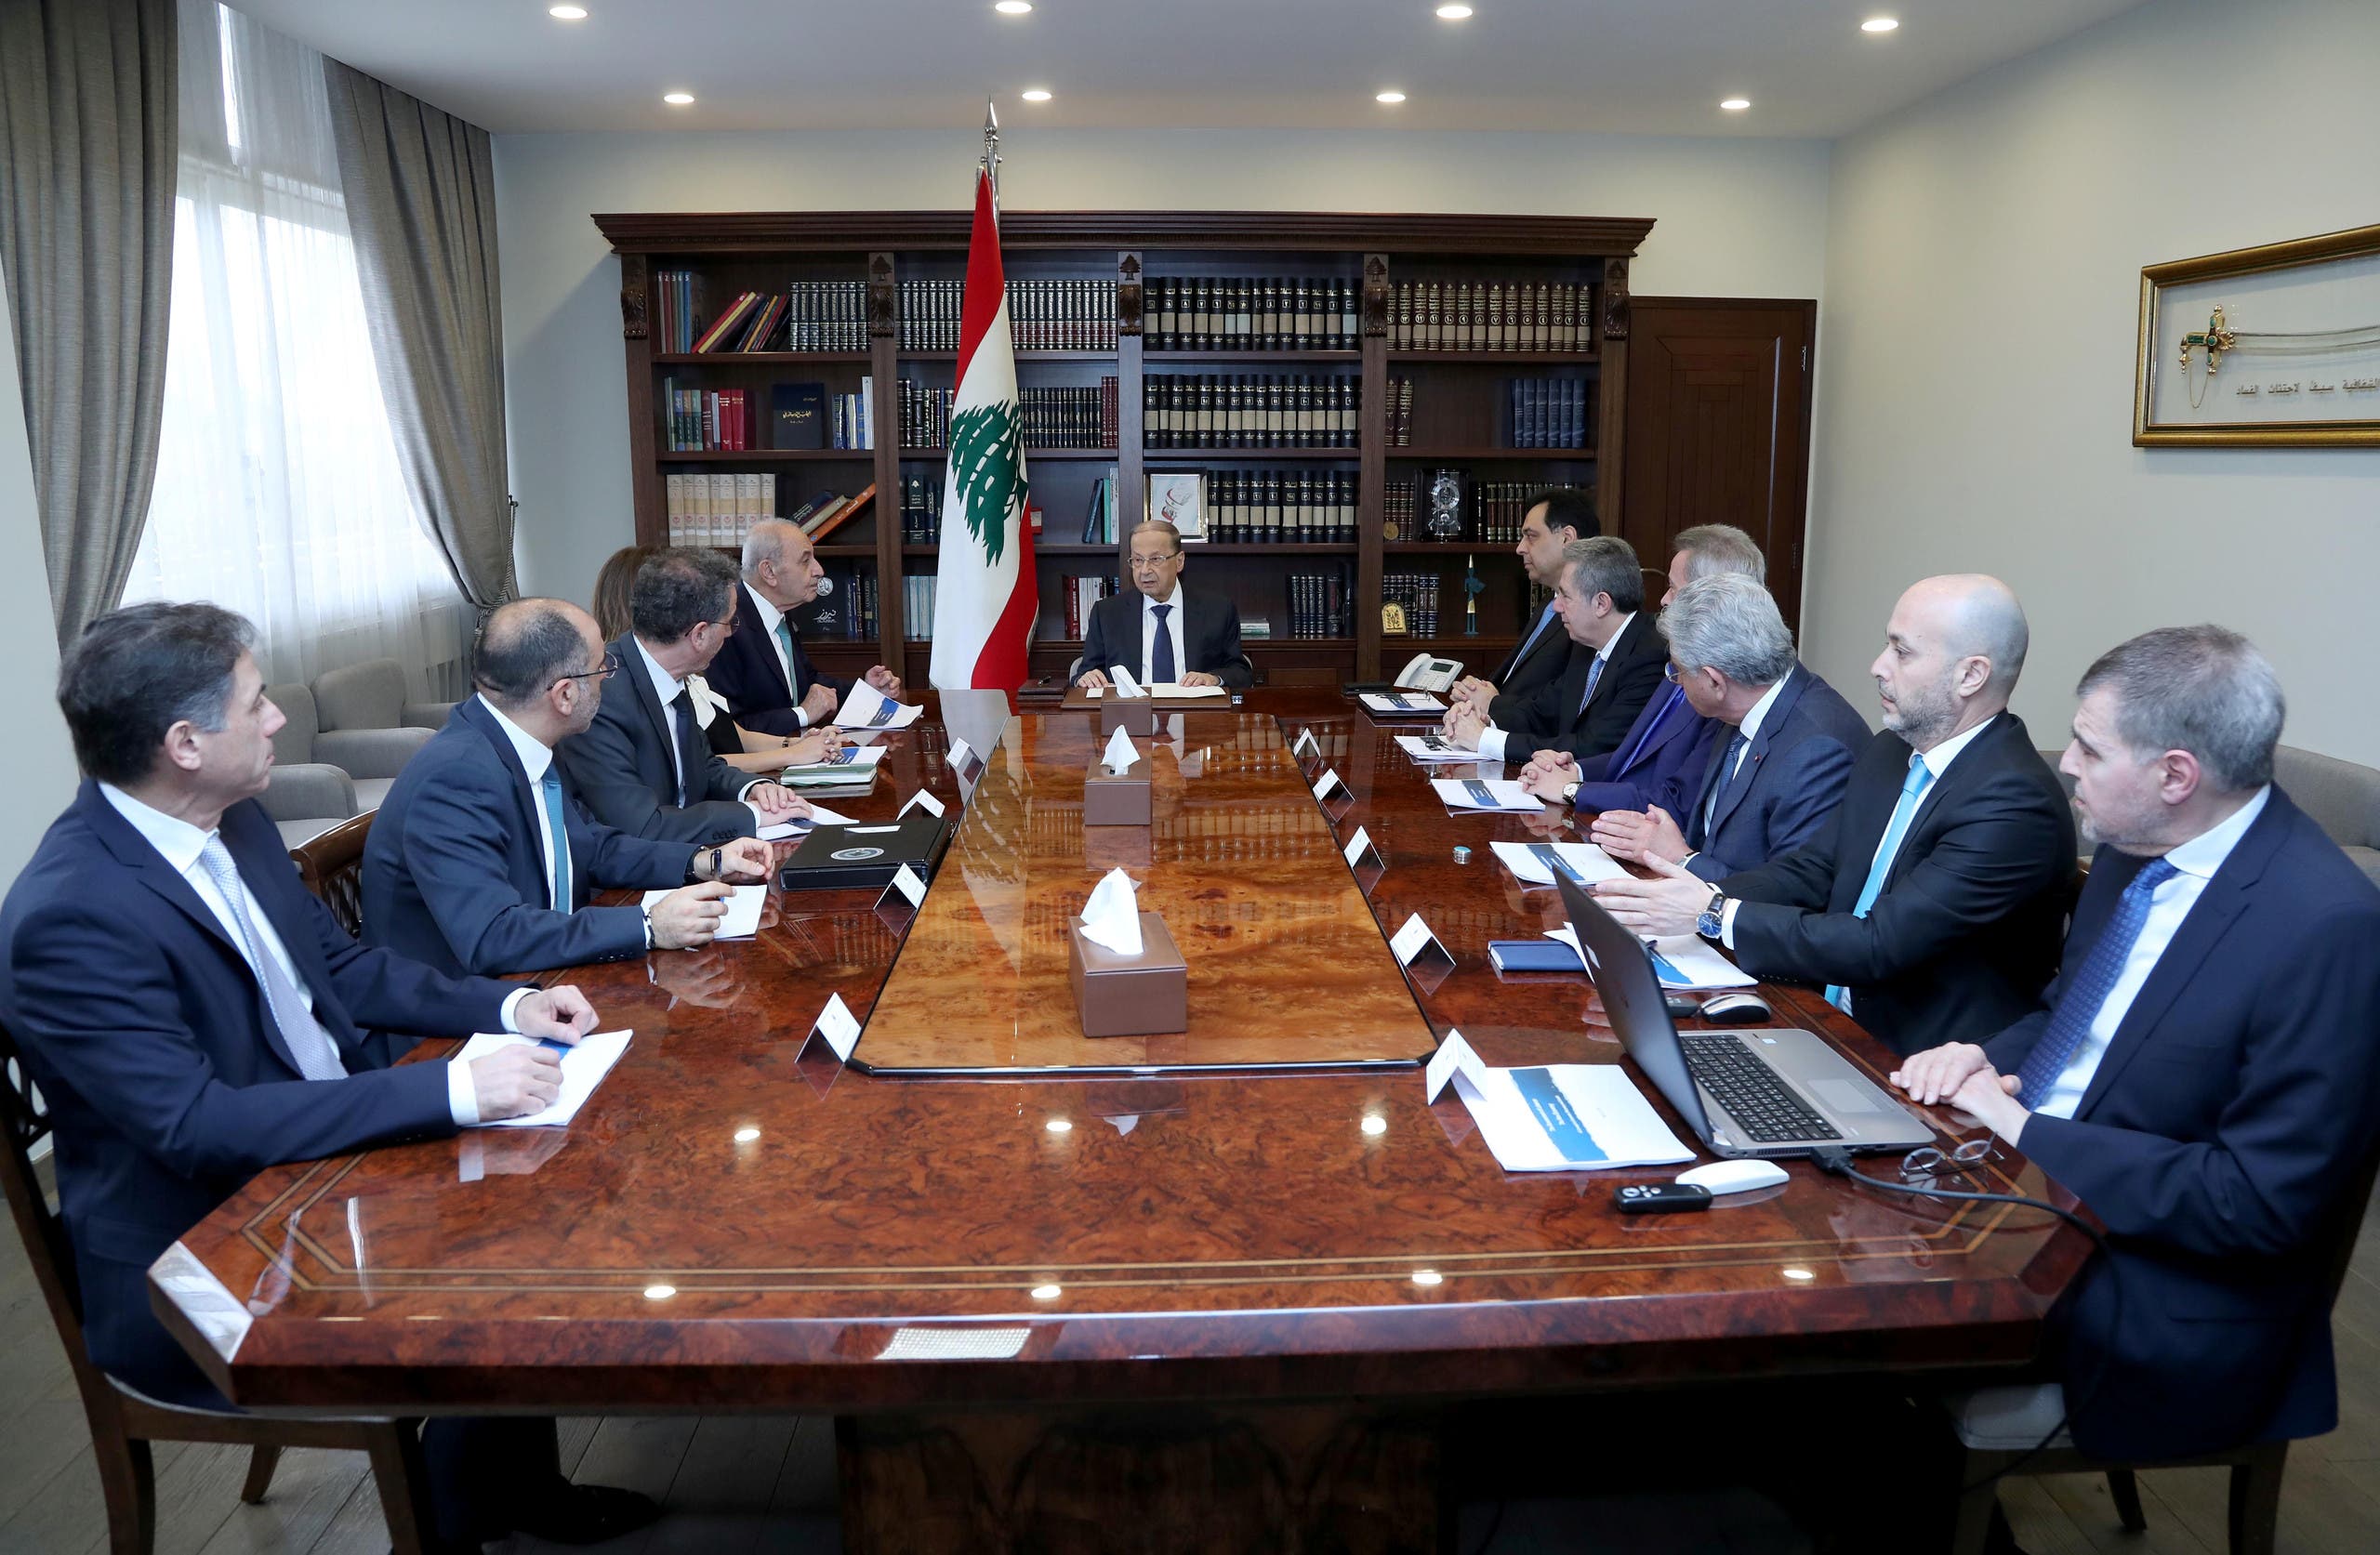 Lebanon's President Michel Aoun heads a financial meeting with Prime Minister Hassan Diab, Parliament Speaker Nabih Berri and Lebanon's Central Bank Governor Riad Salameh at the presidential palace in Baabda, Lebanon, March 7, 2020. (Reuters)